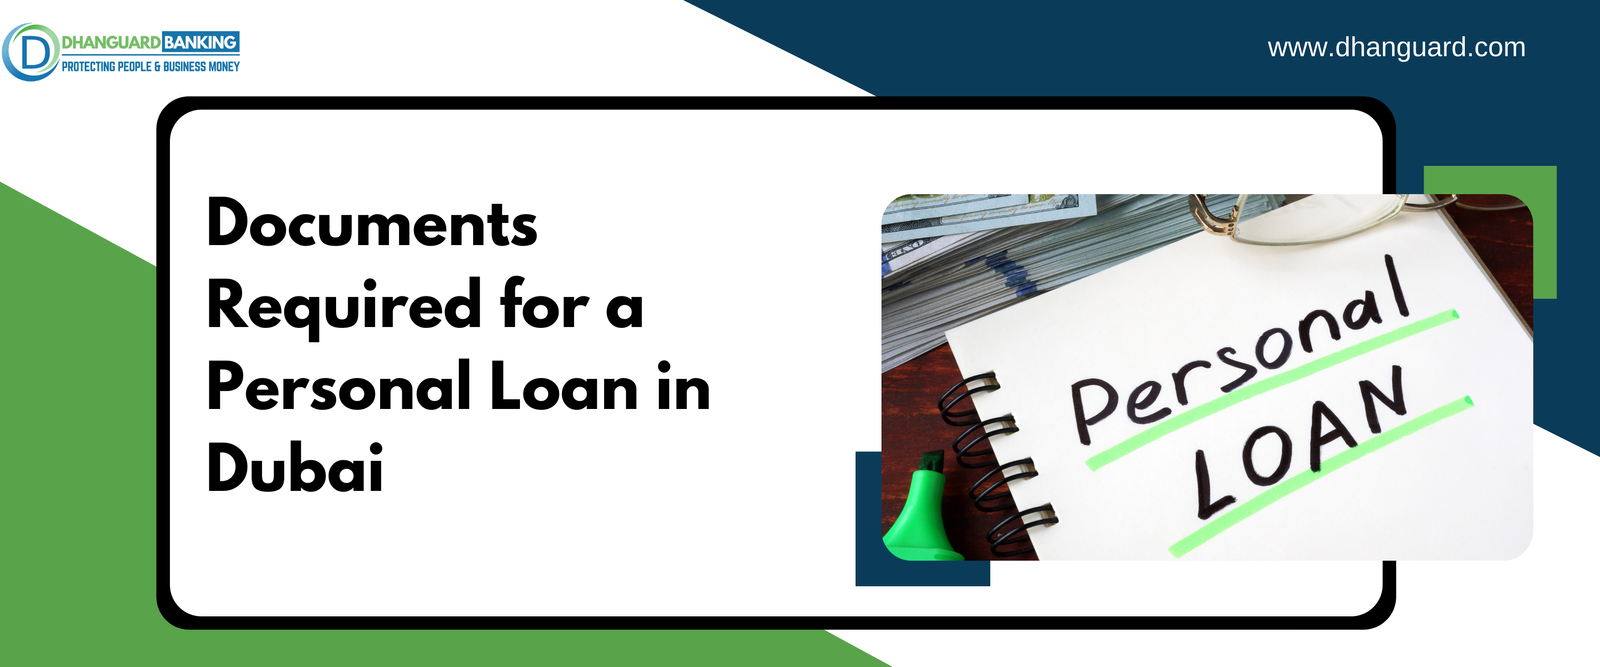 Documents Required for a Personal Loan in Dubai and Its Eligibility Criteria